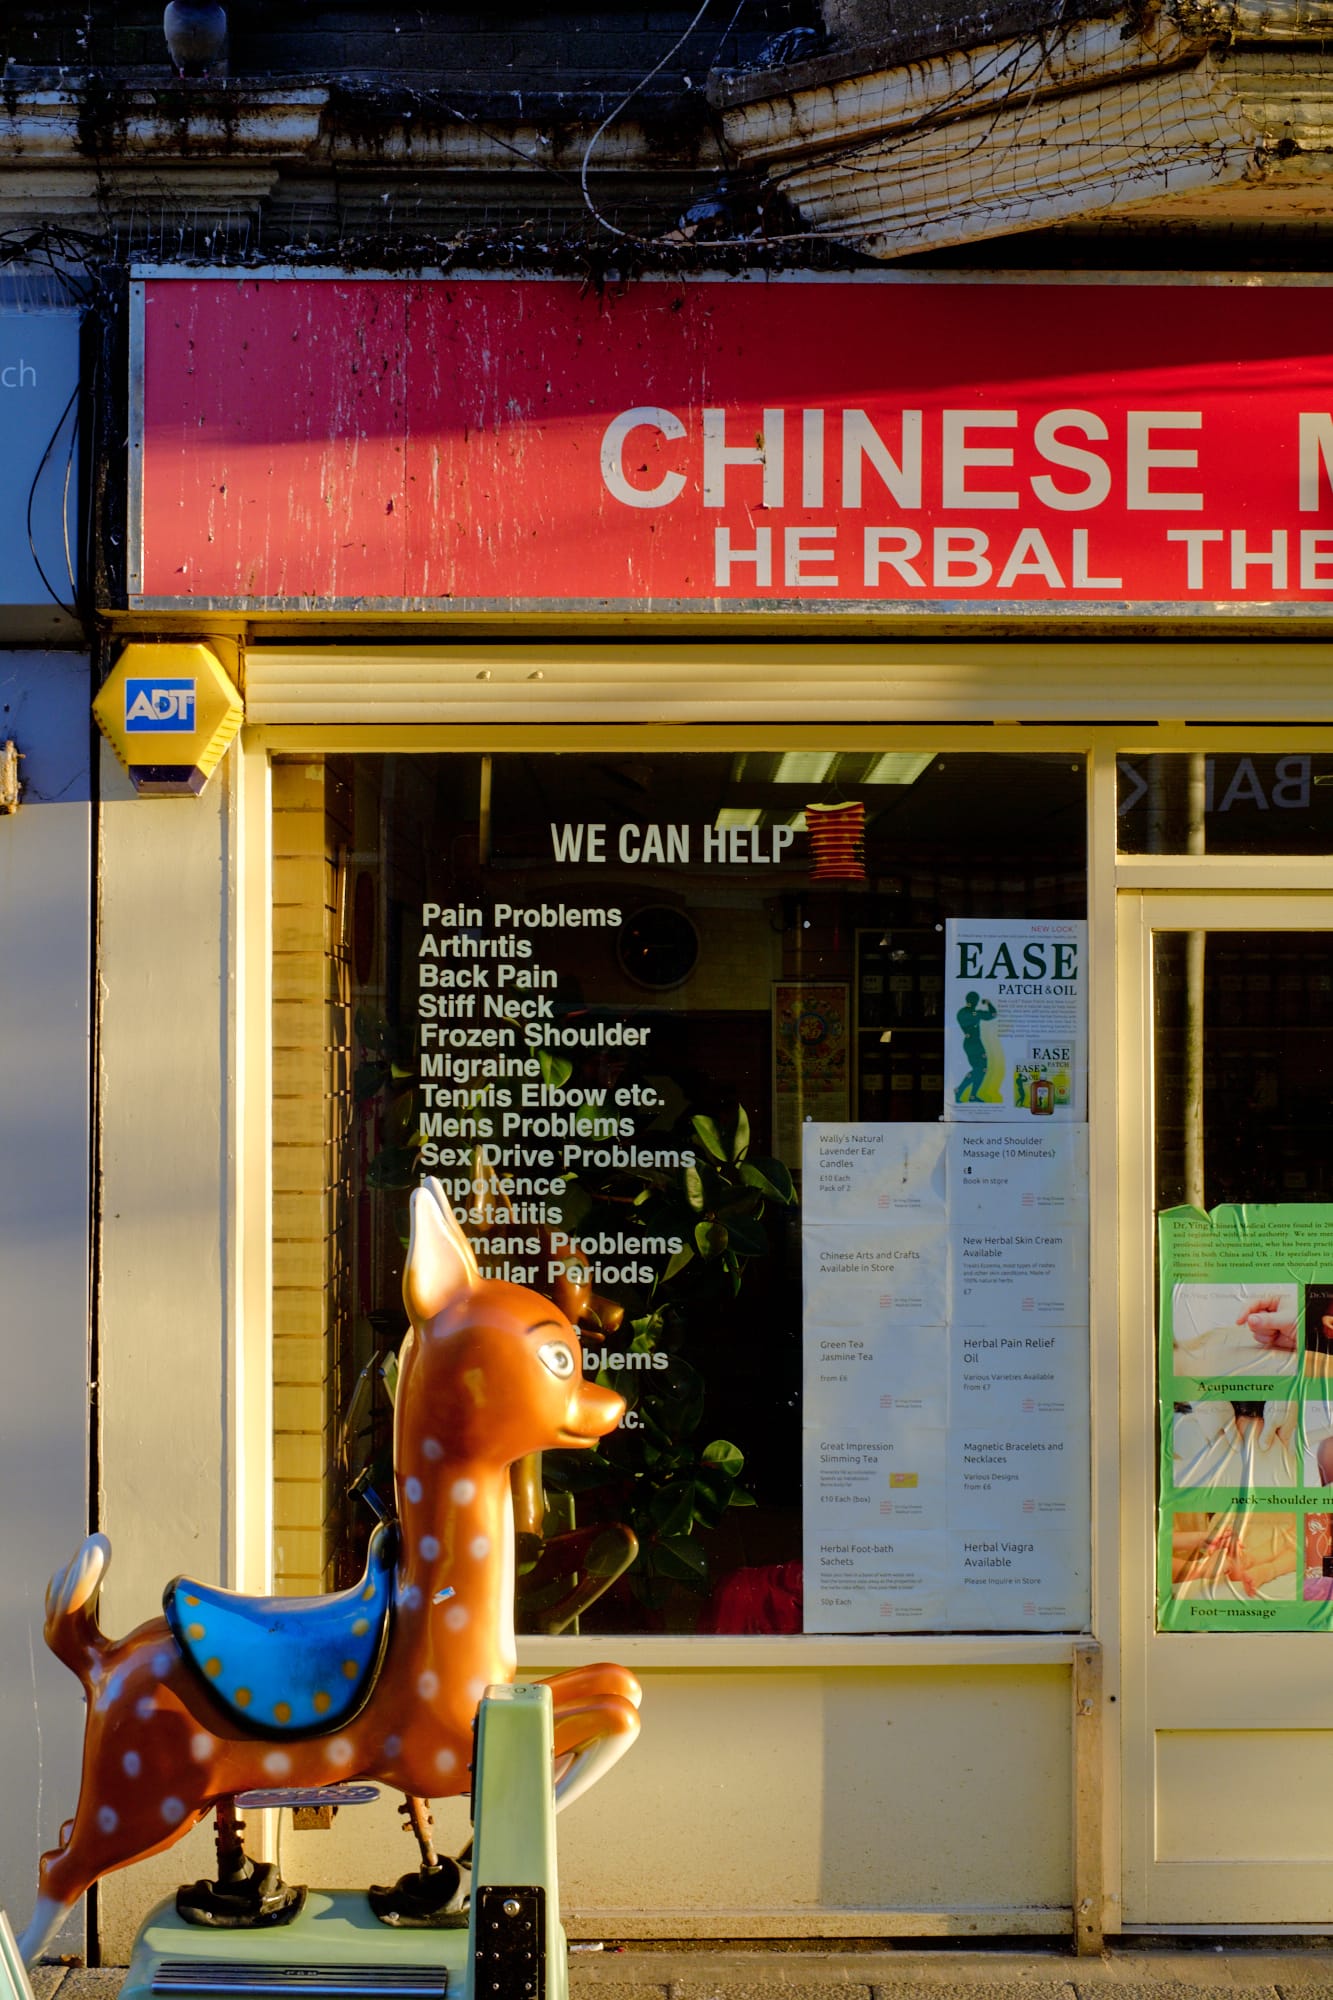 children’s ride outside Chinese herbal medicine shop